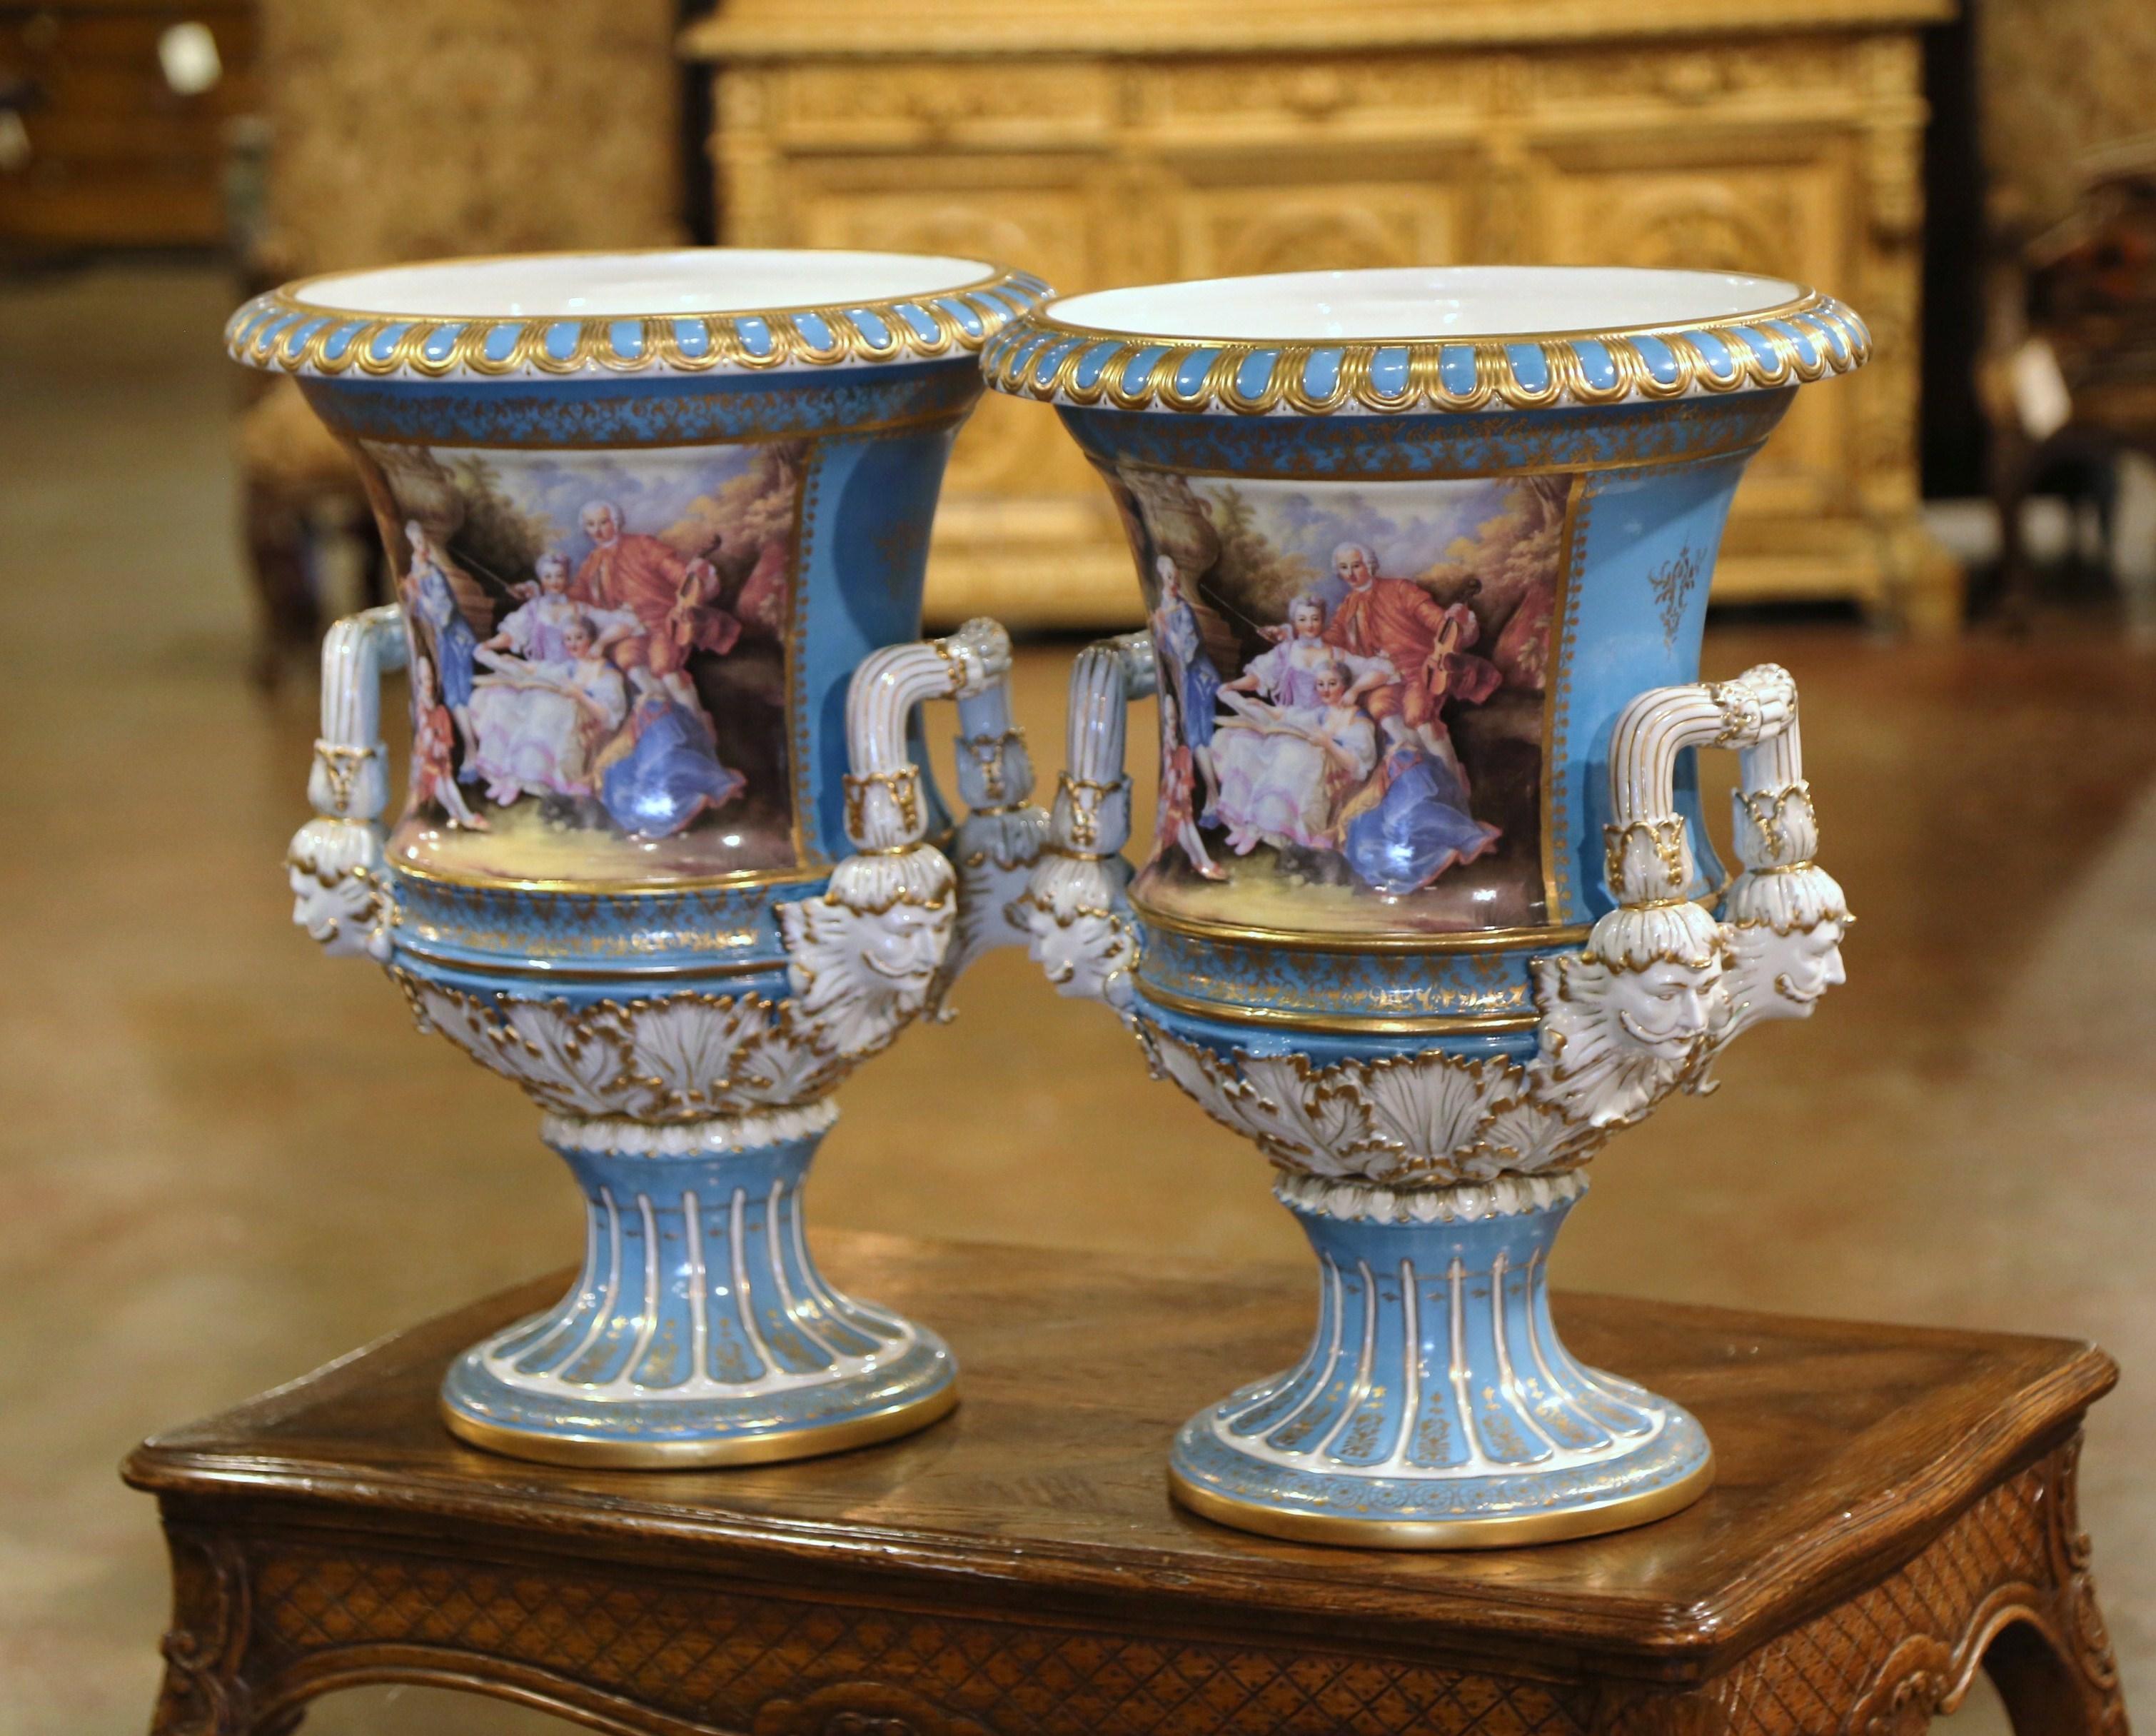 Decorate a buffet or a mantel with this large pair of antique porcelain urns. Crafted in France circa 1950 in the manner of Sevres, each colorful vase is mounted on a circular base decorated with acanthus leaf motif in high reliefs and embellished